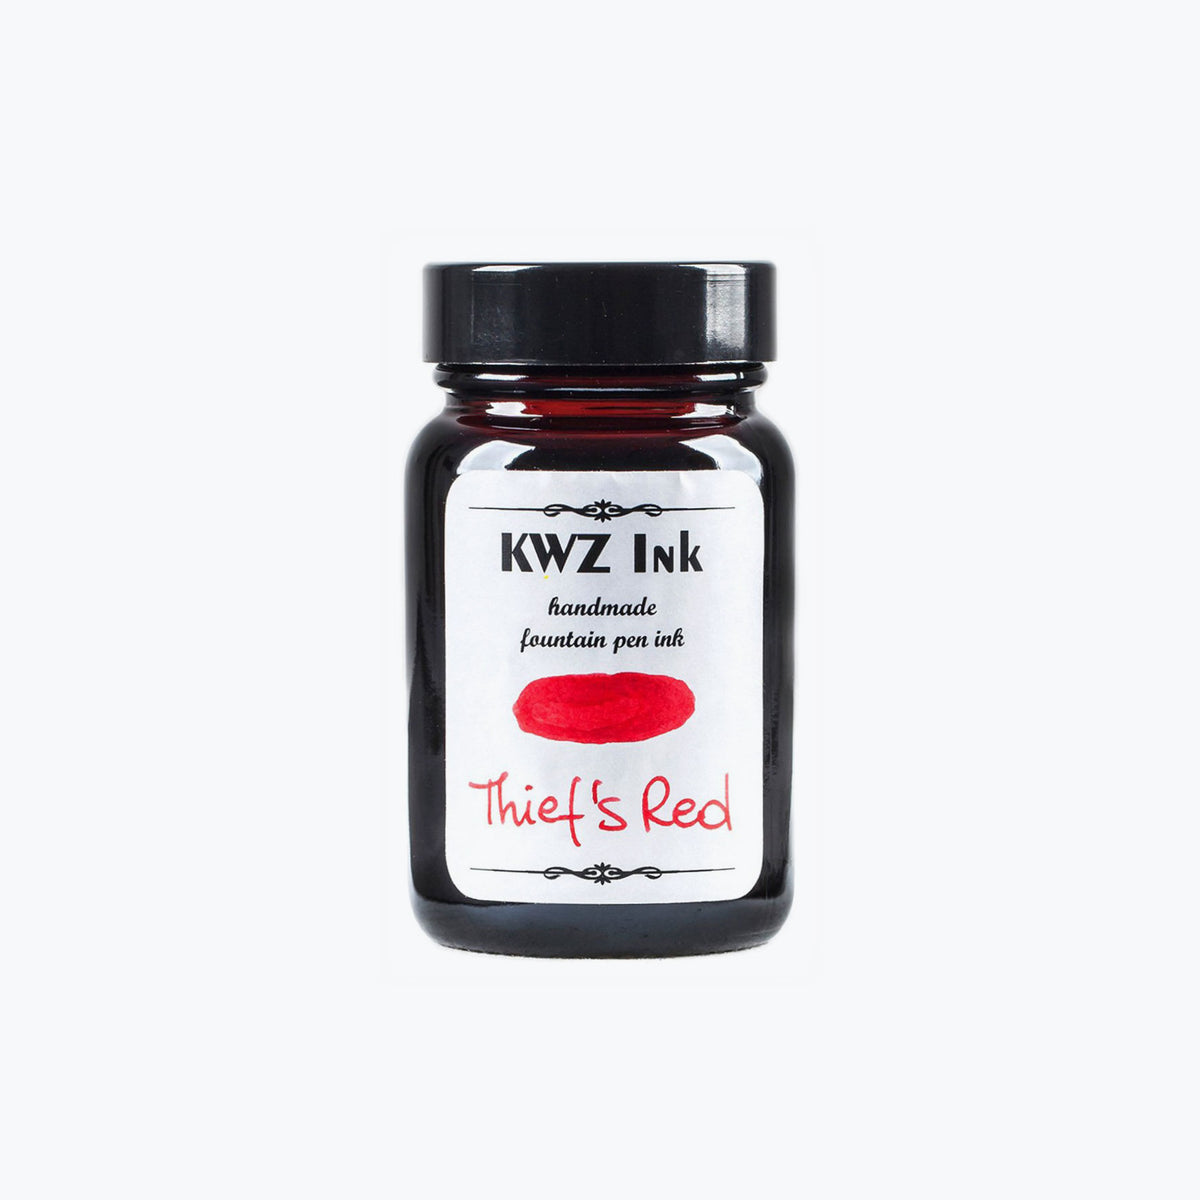 KWZ Thief's Red fountain pen ink